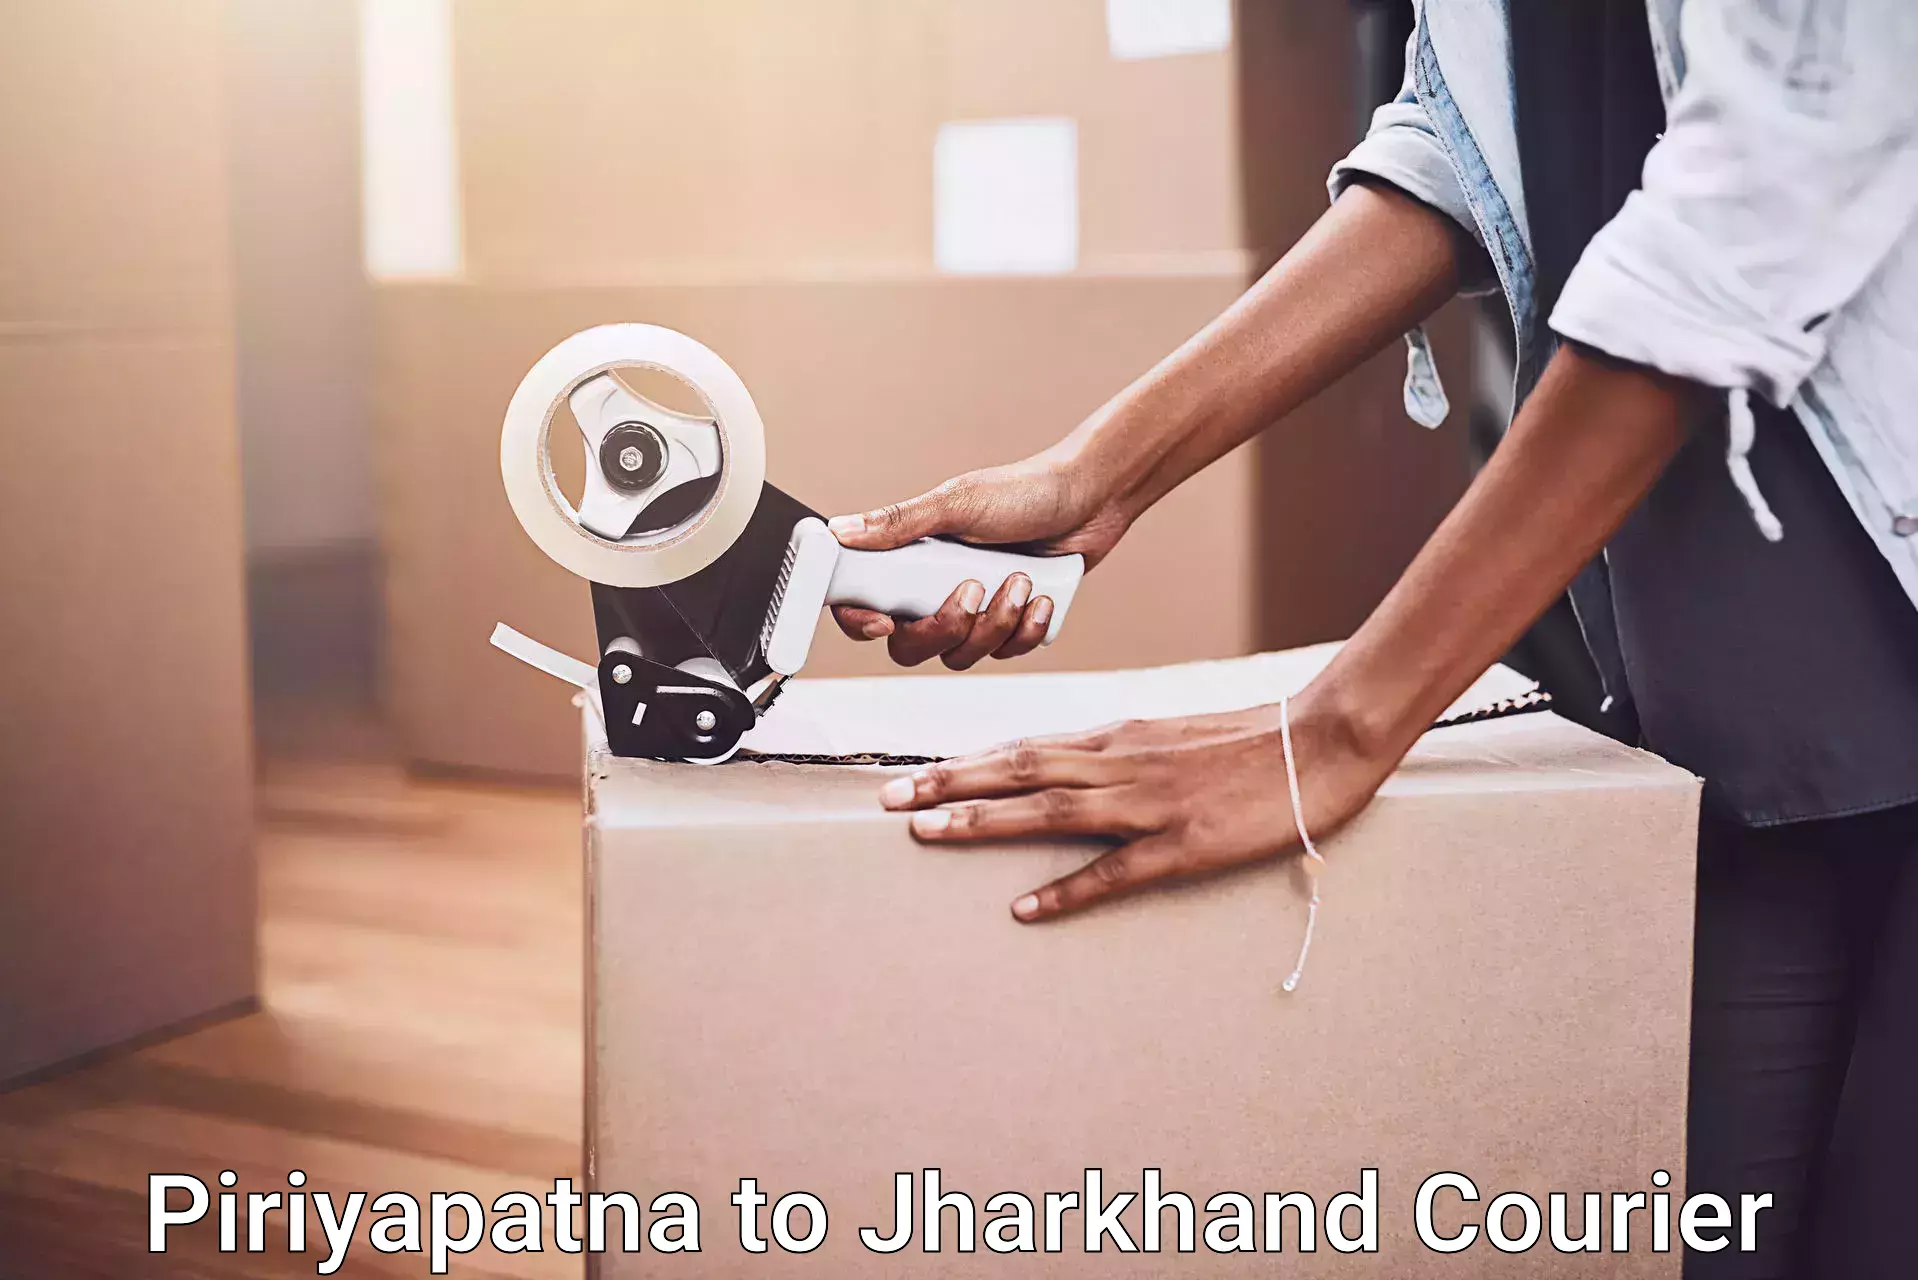 Packing and moving services Piriyapatna to Jharkhand